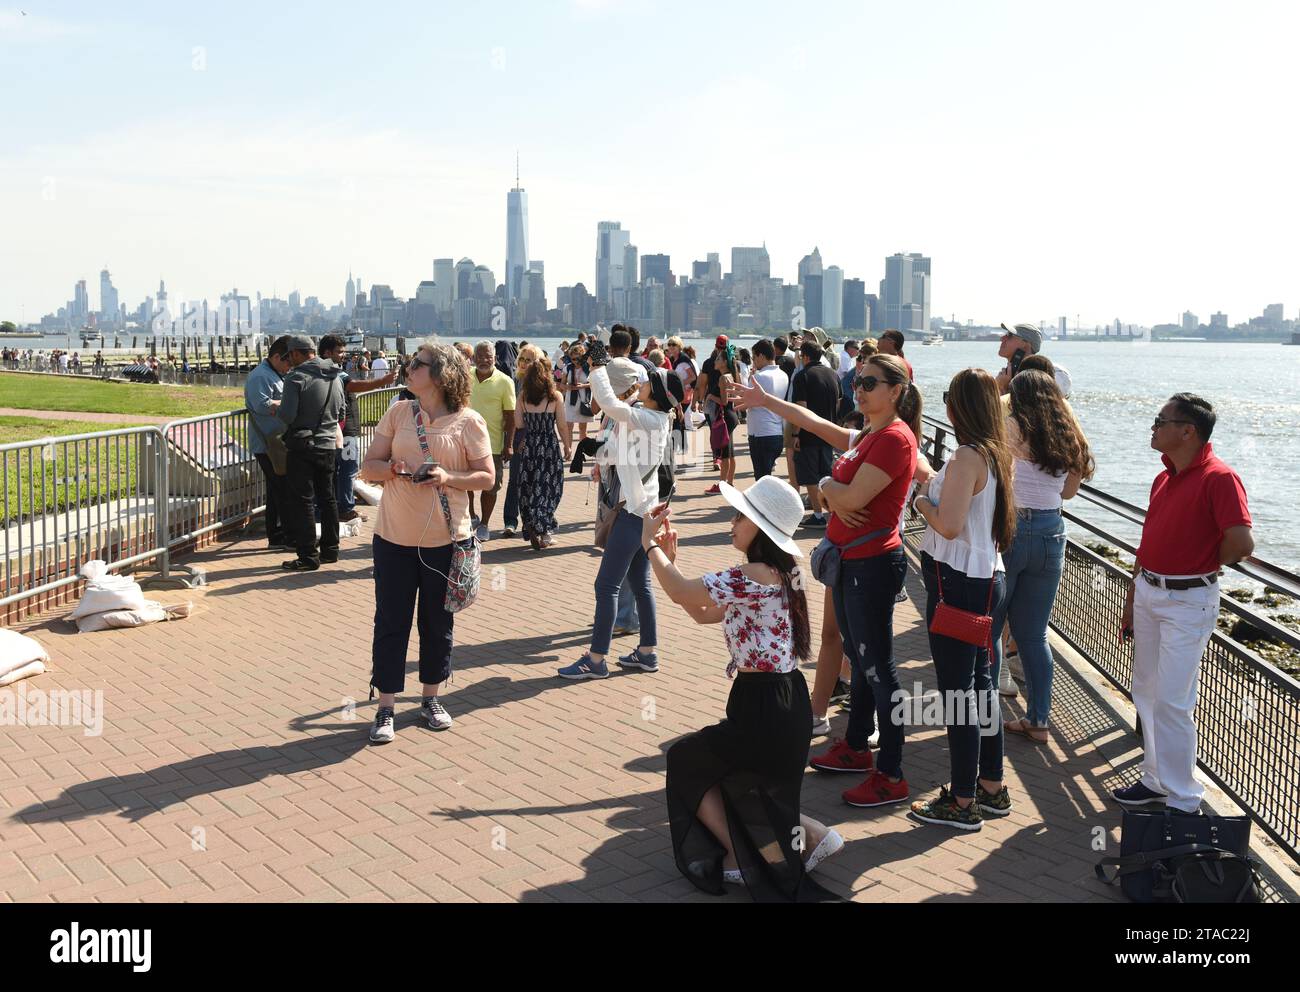 New York, USA - June 09, 2018: Crowd of people near the  Statue of Liberty. Stock Photo